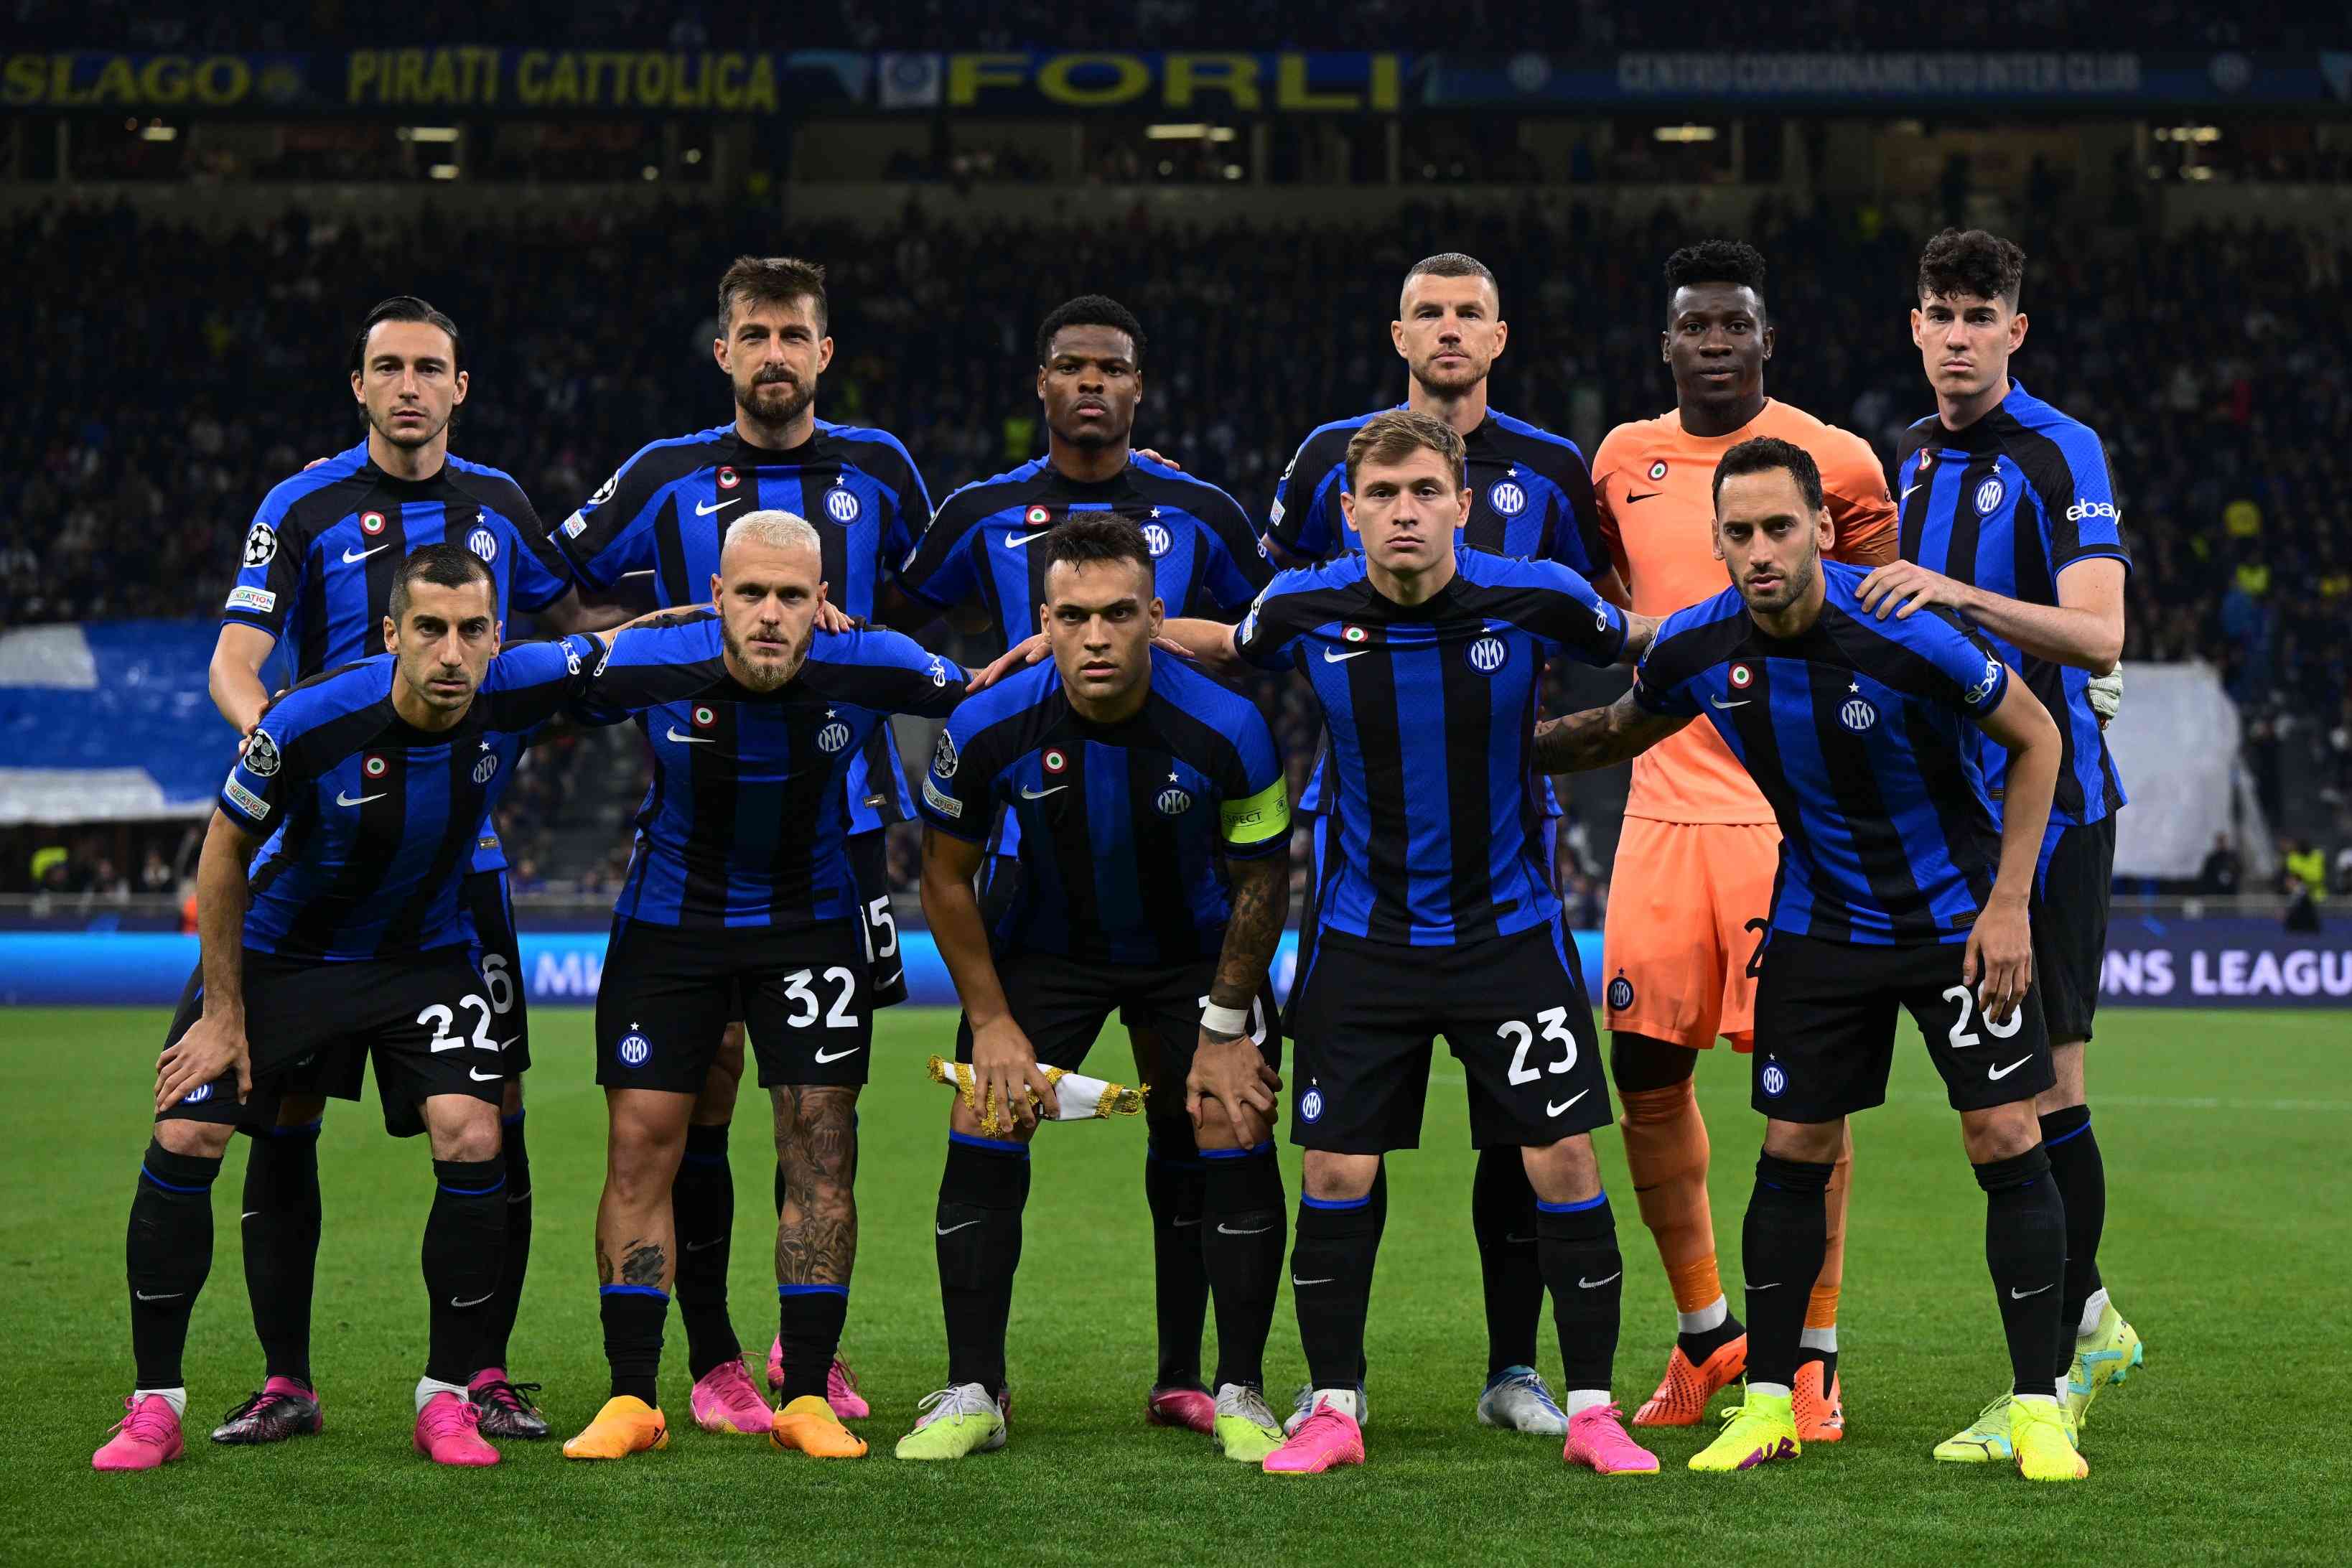 Inter Milan treasure first Champions League final in 13 years